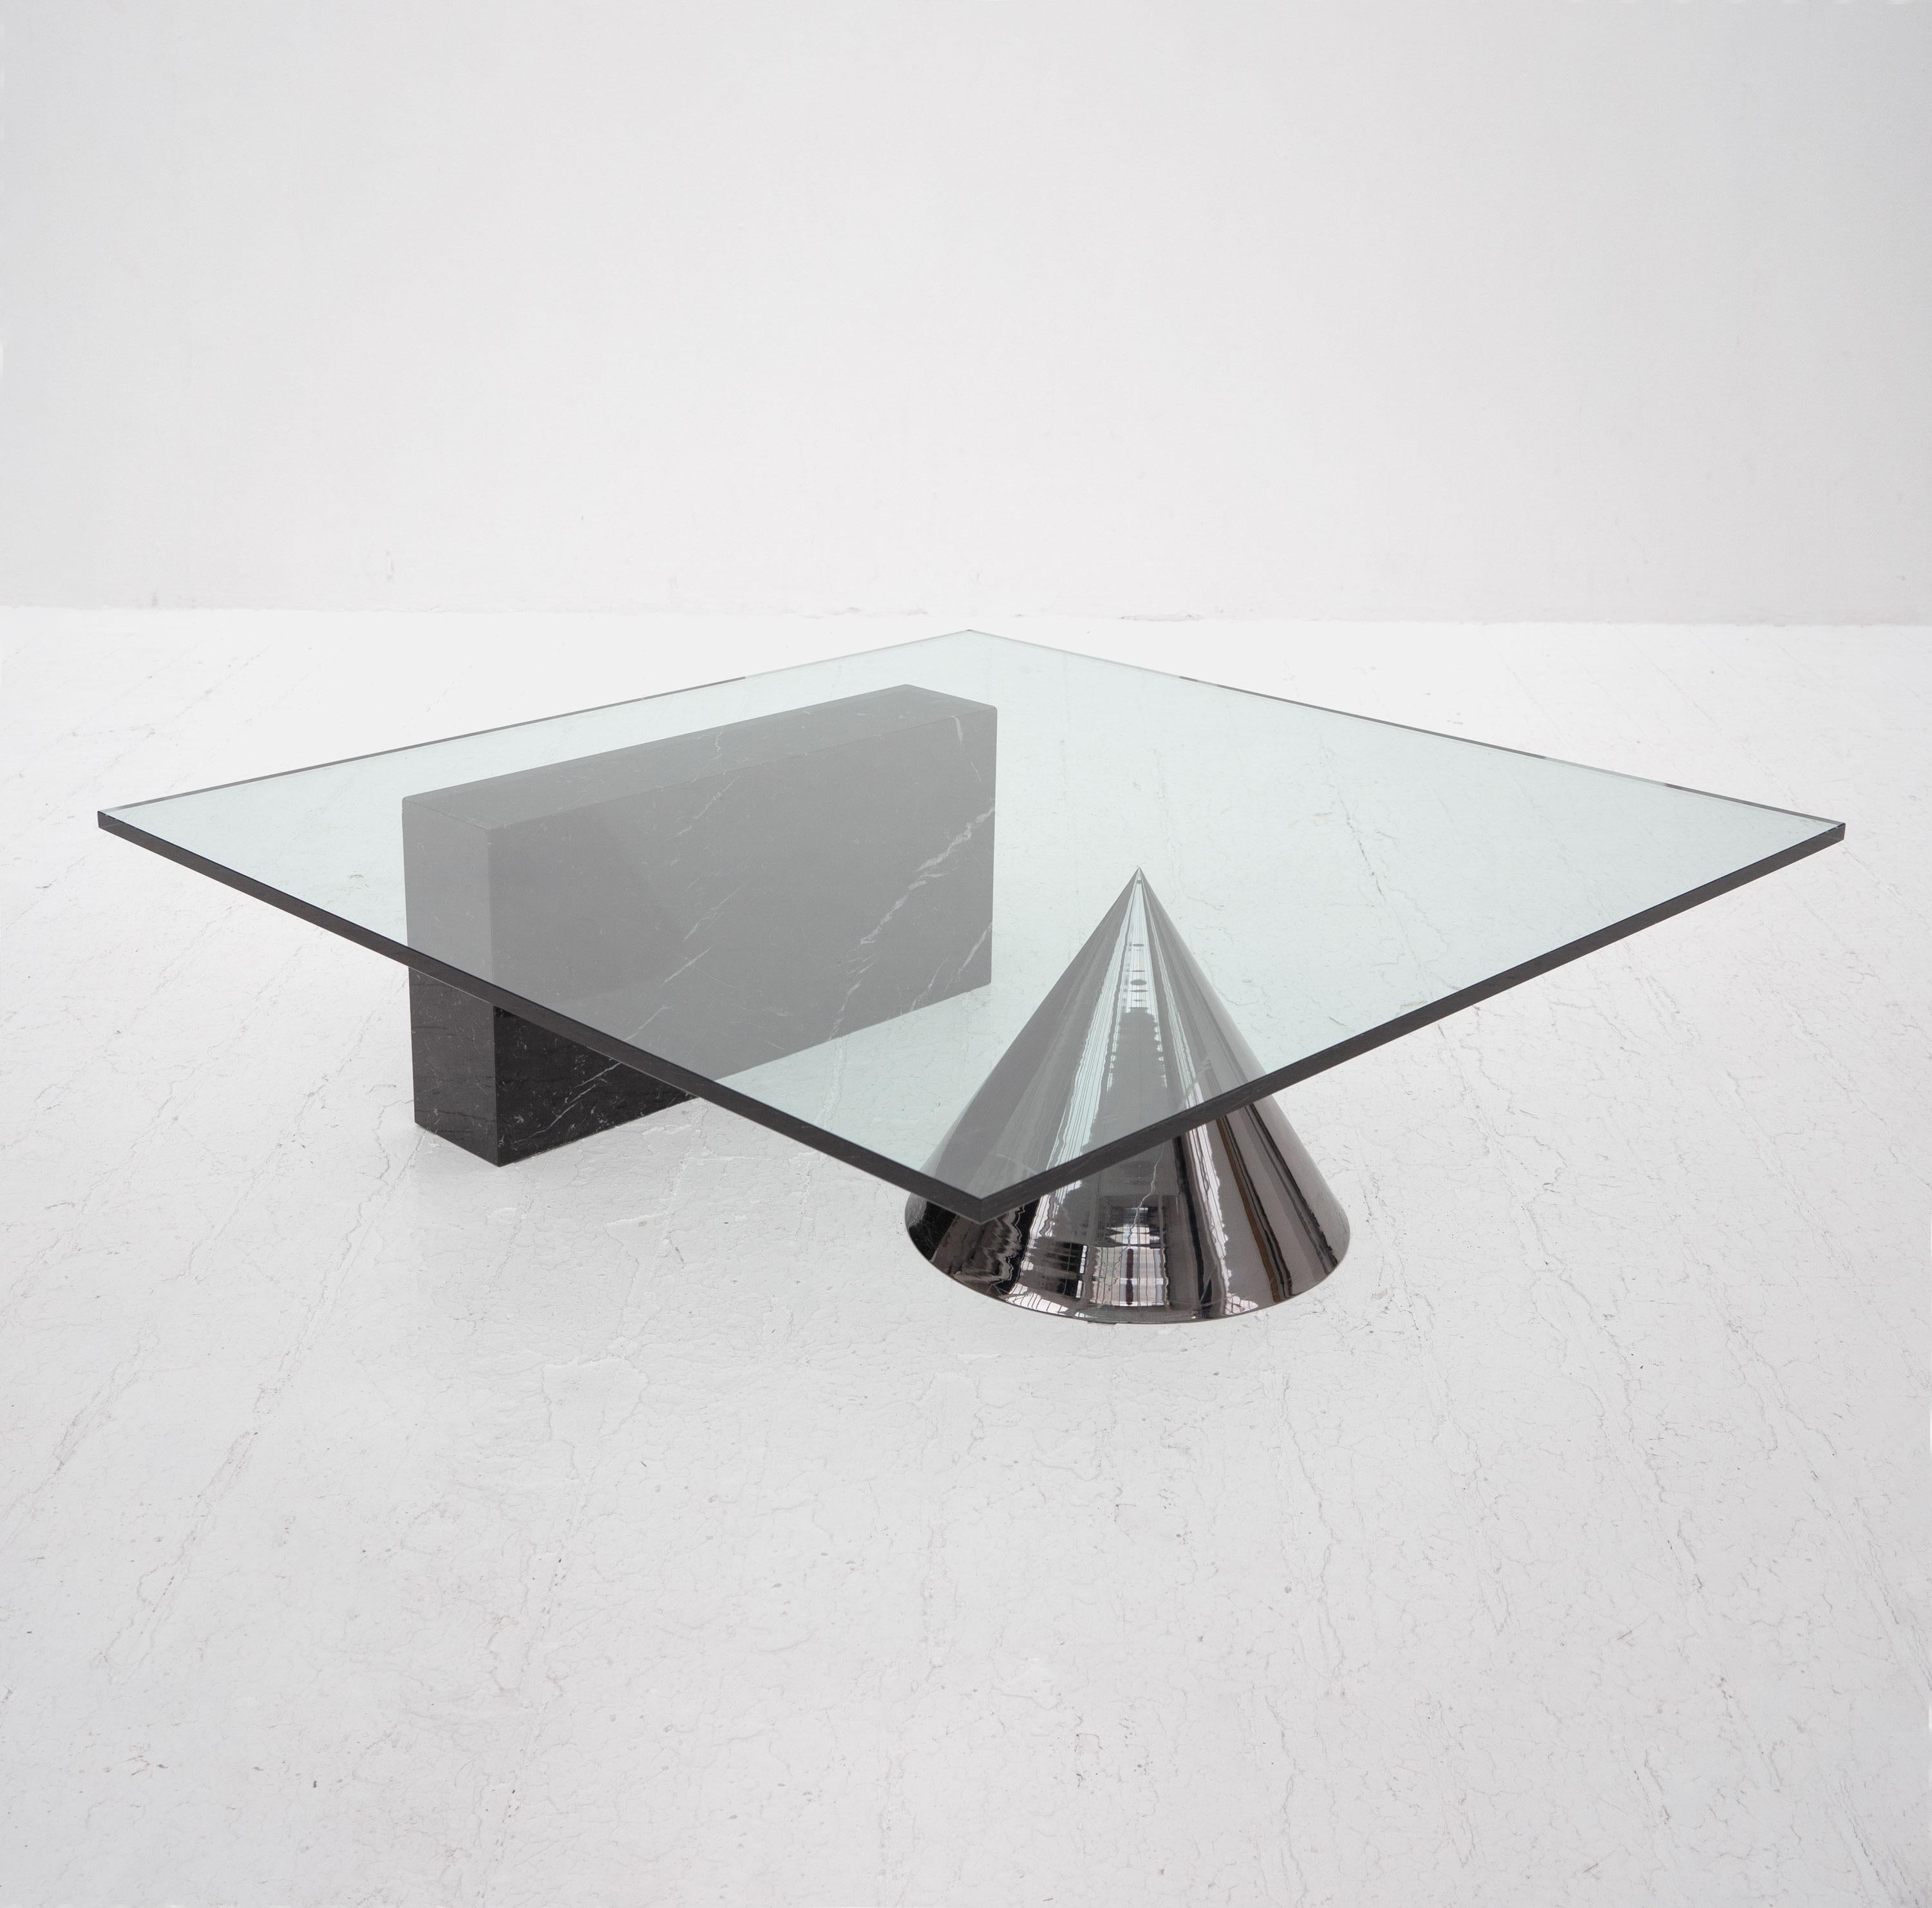 A Kono coffee table designed by Lella & Massimo Vignelli and produced by Casigliani, c.1980. Composed of a solid black marble cuboid and tinted chrome steel cone supporting a thick toughened glass top.

For over 50 years, Italian-born